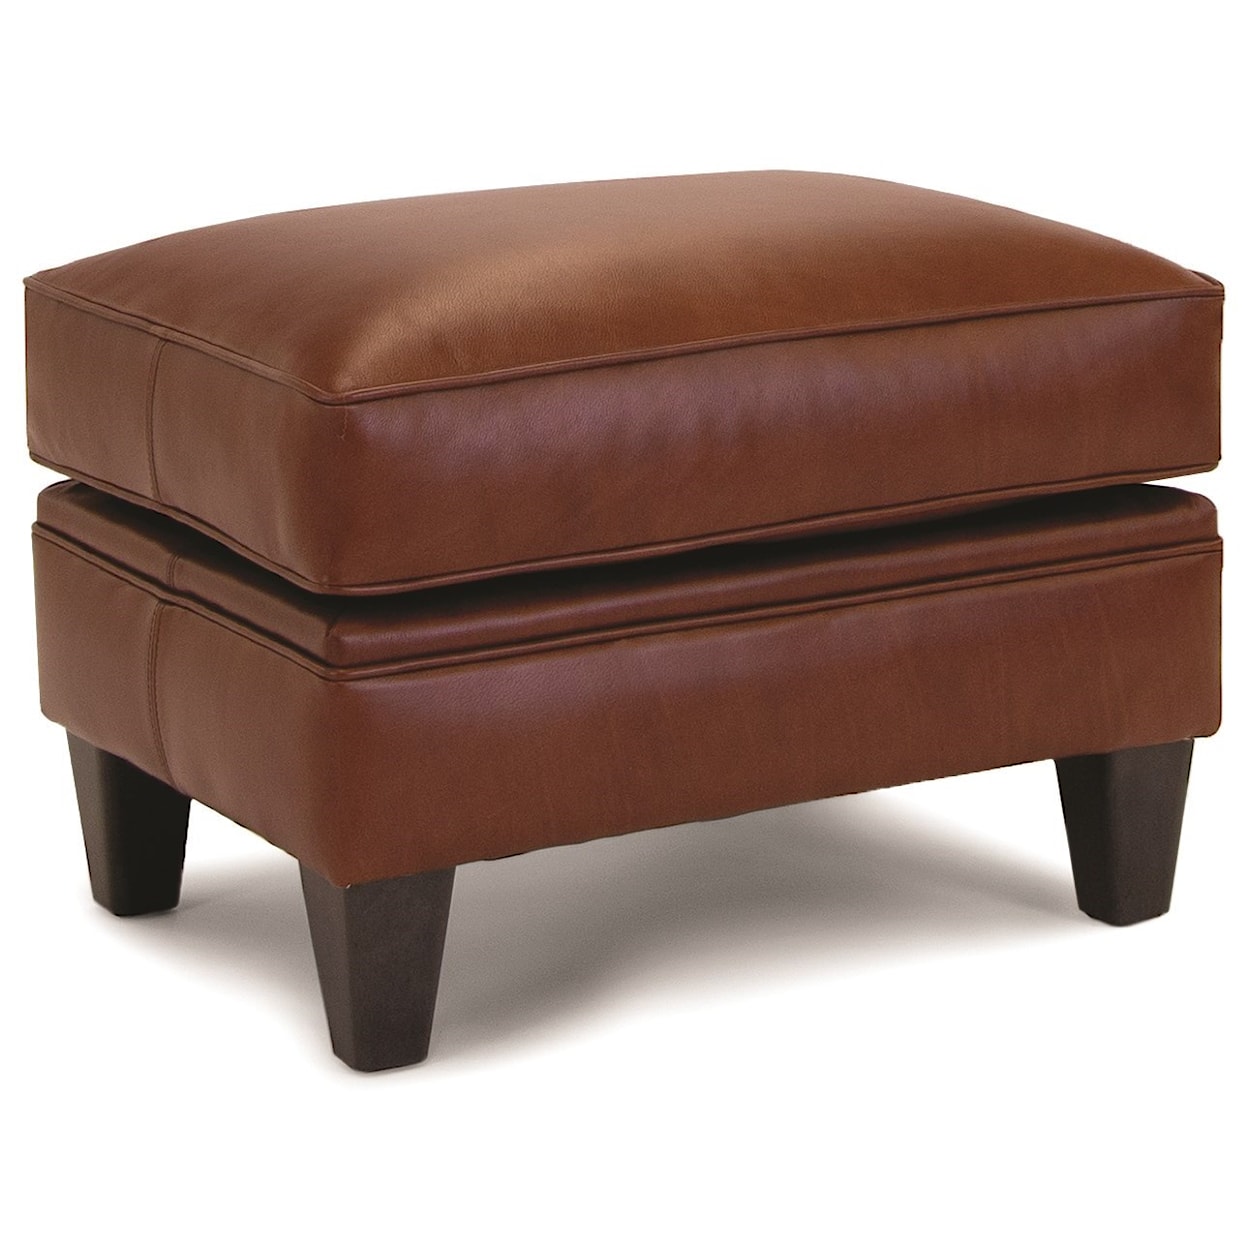 Smith Brothers Build Your Own 3000 Series Customizable Ottoman